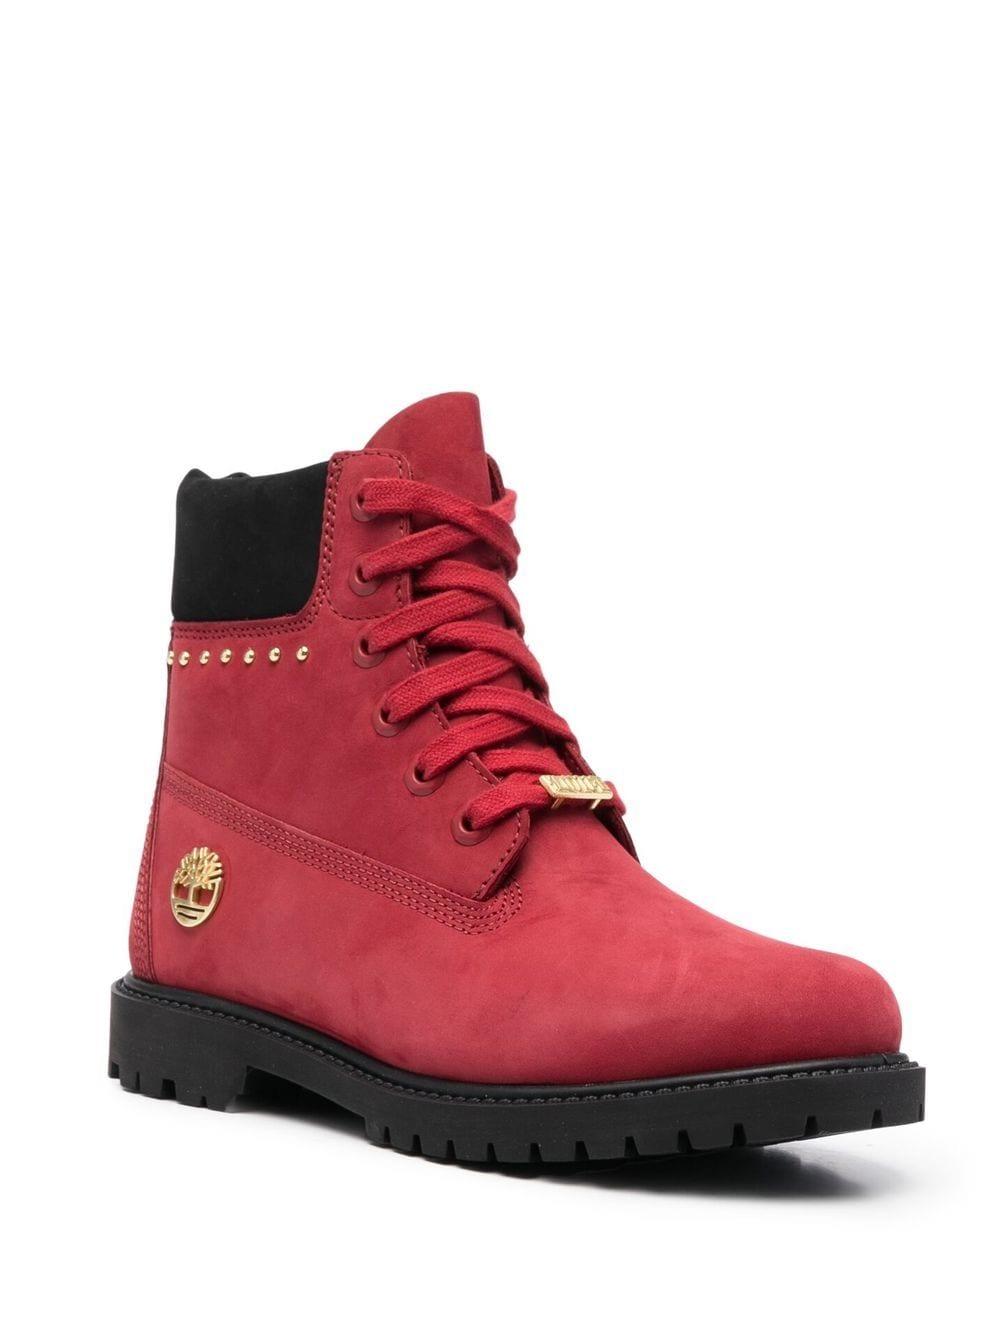 Timberland Leather Boots Bordeaux in Red | Lyst